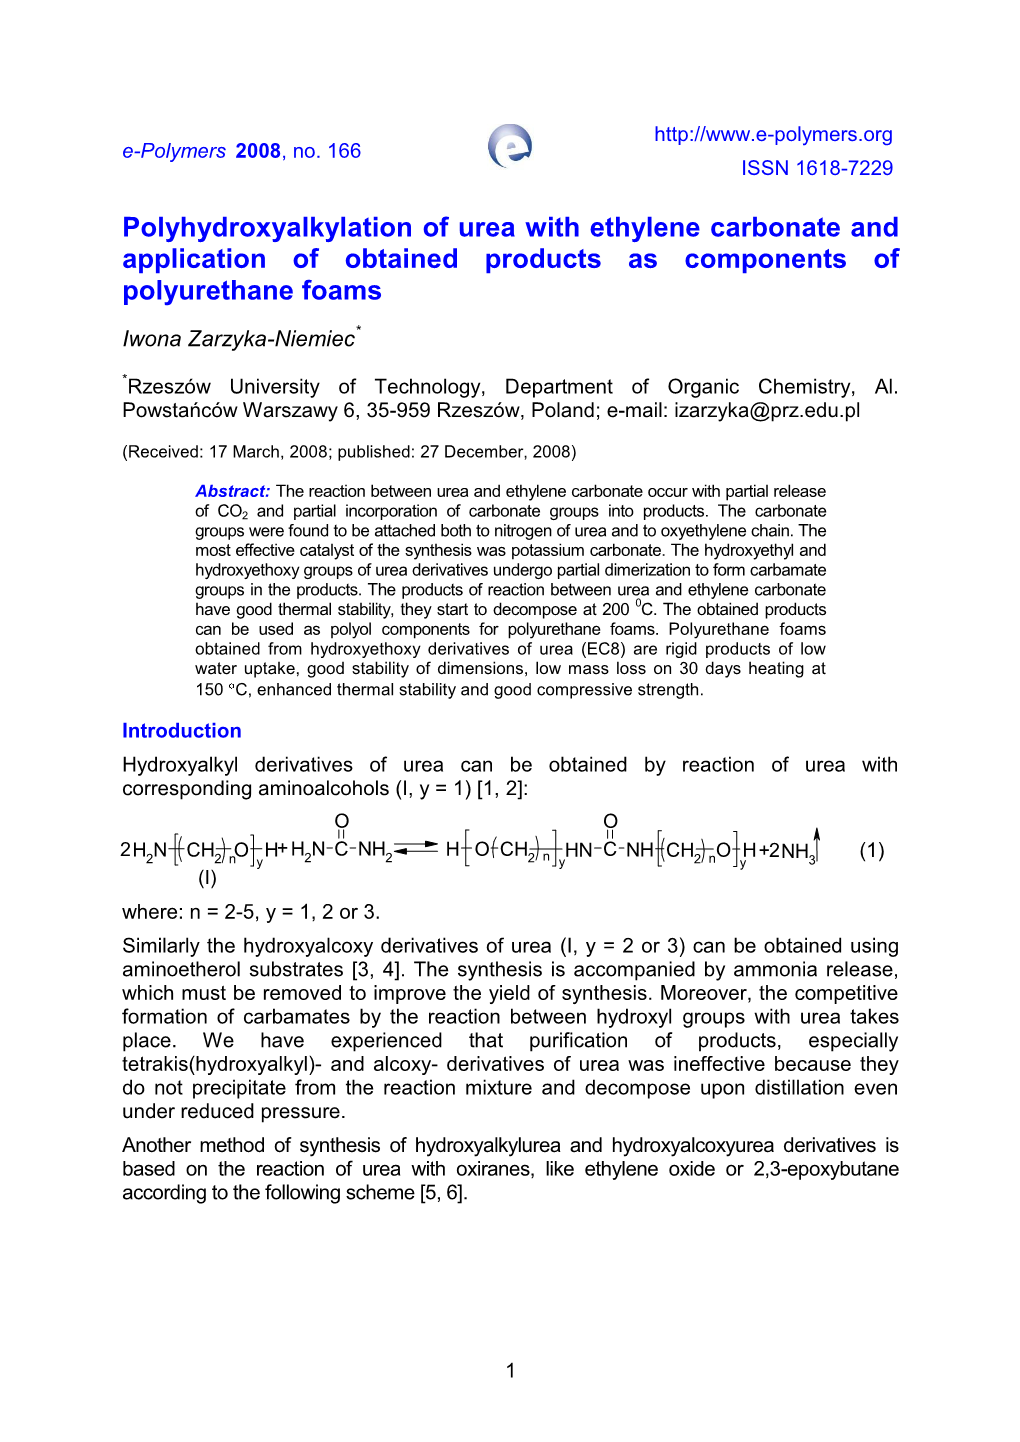 Polyhydroxyalkylation of Urea with Ethylene Carbonate and Application of Obtained Products As Components of Polyurethane Foams